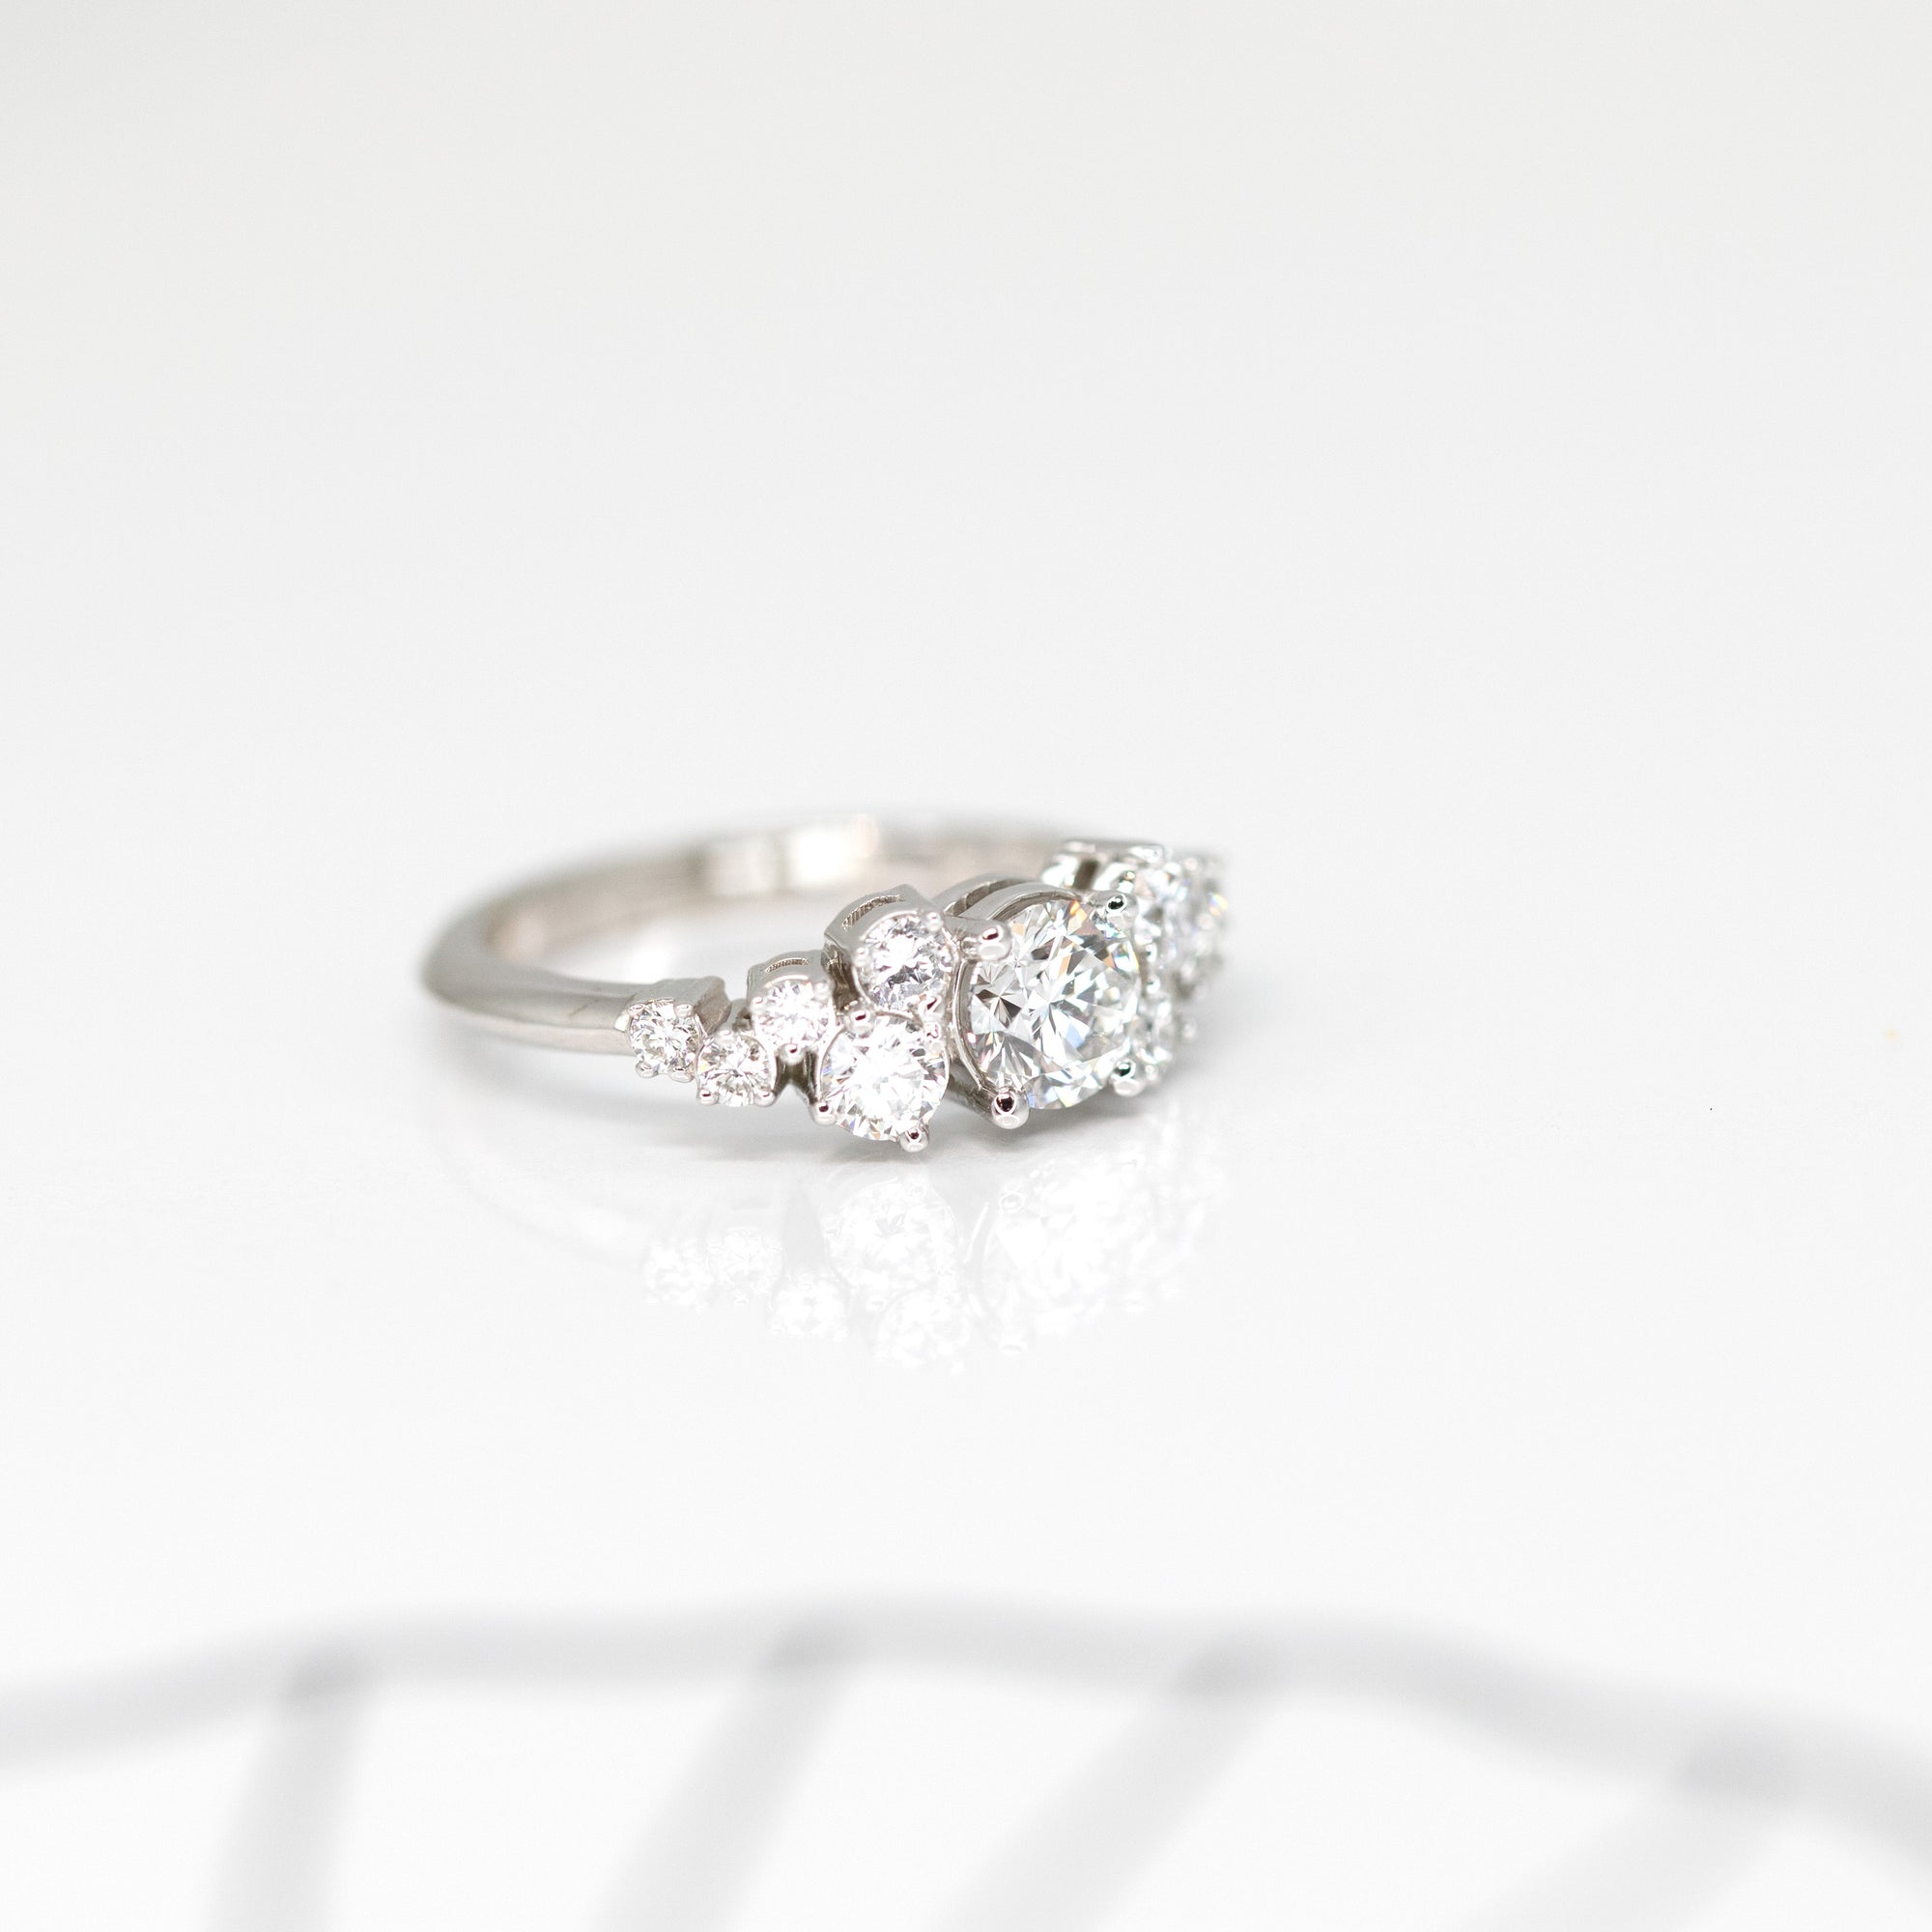 side view of custom made diamond engagement ring made by artisan bena jewelry designer for the jeweler ruby mardi in montreal on a white background